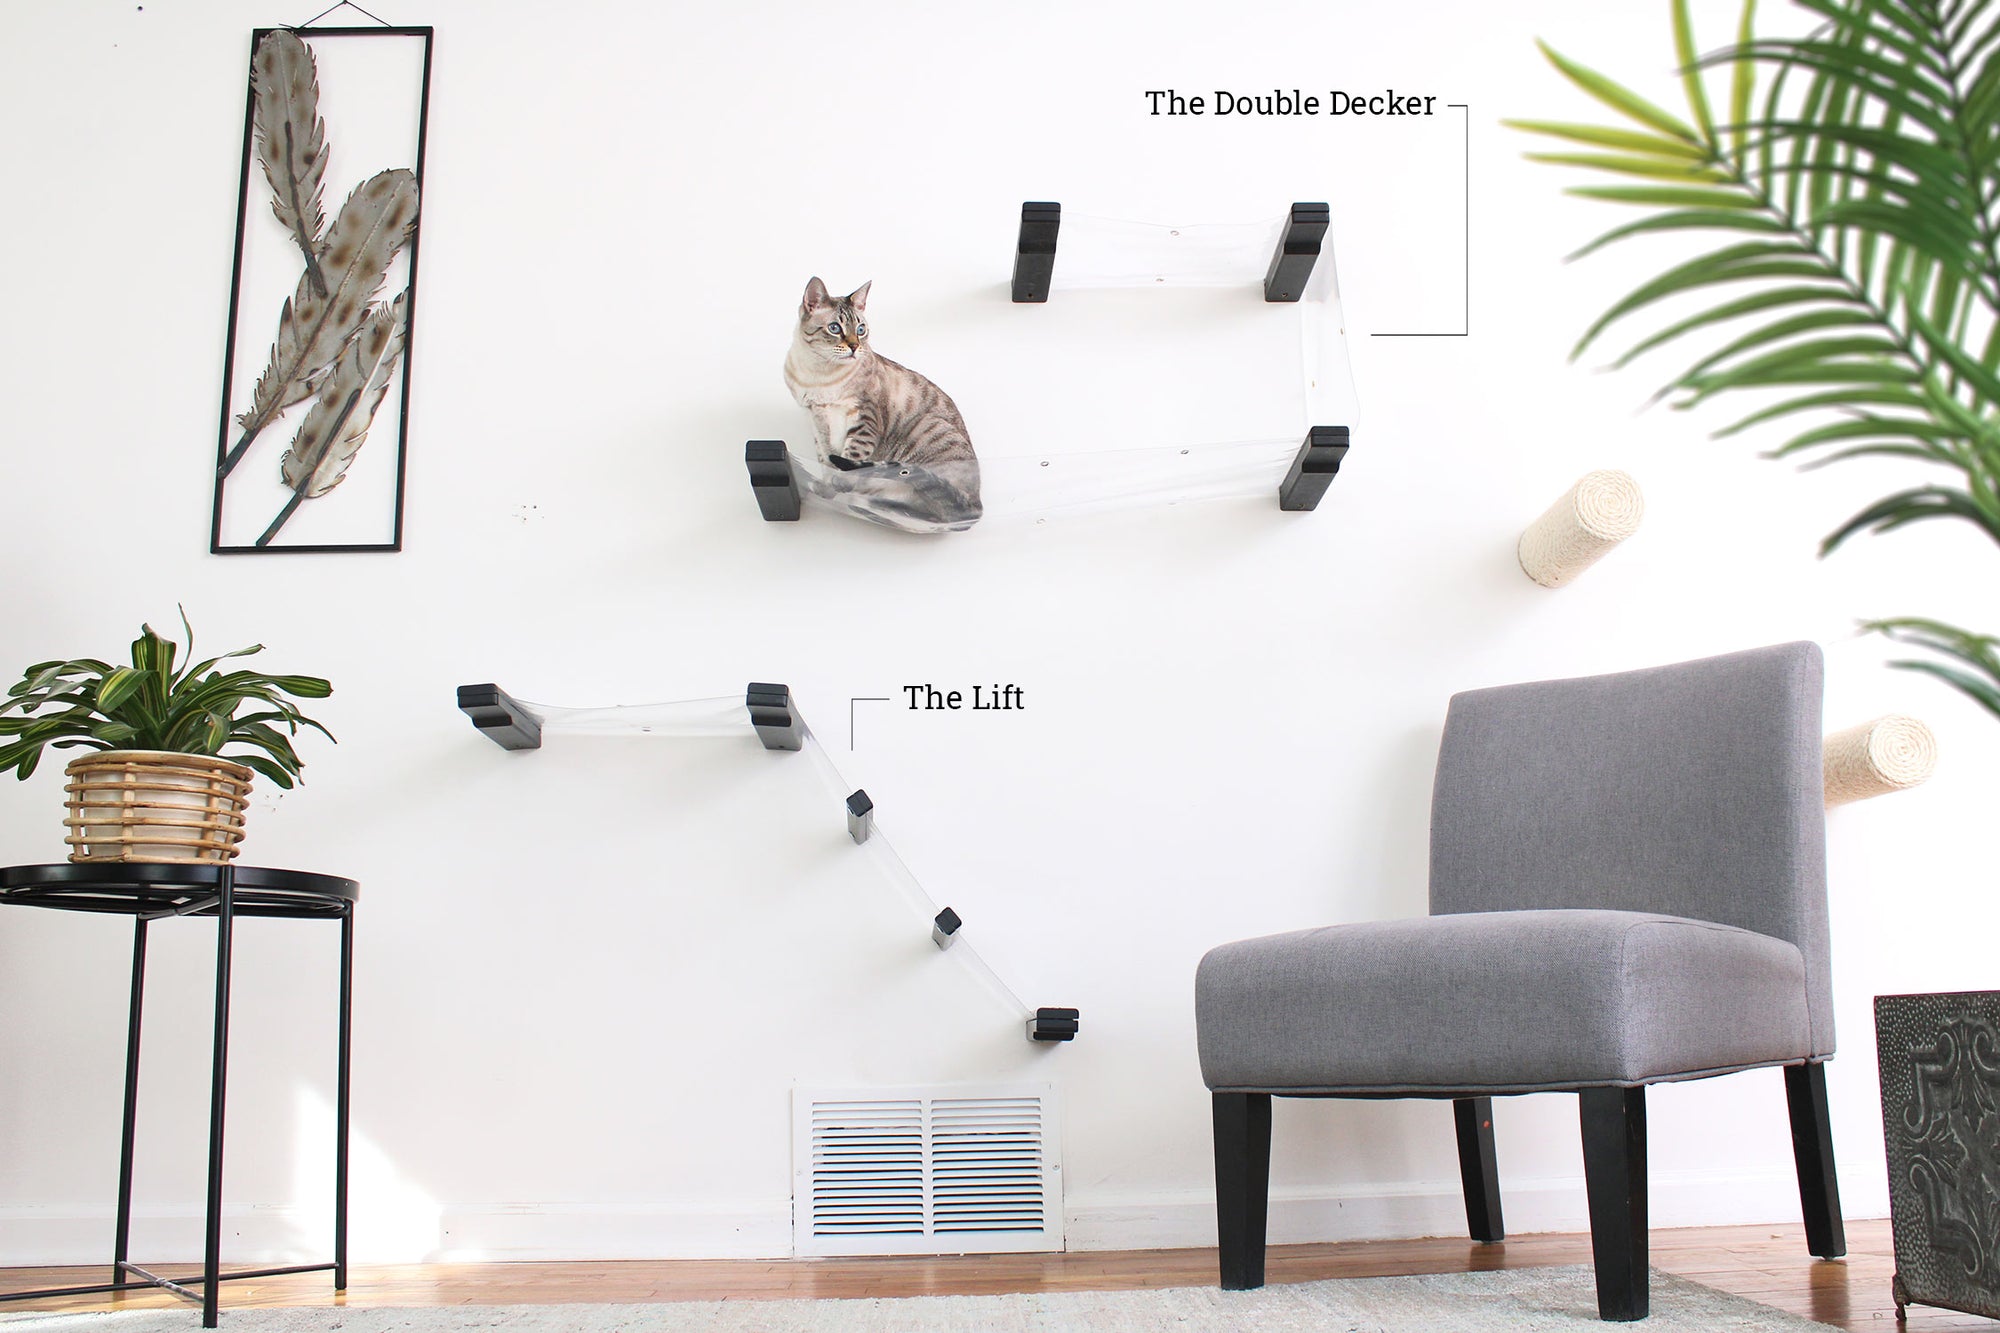 The Lift and Double Decker Invisible Cat Hammocks mounted on a wall